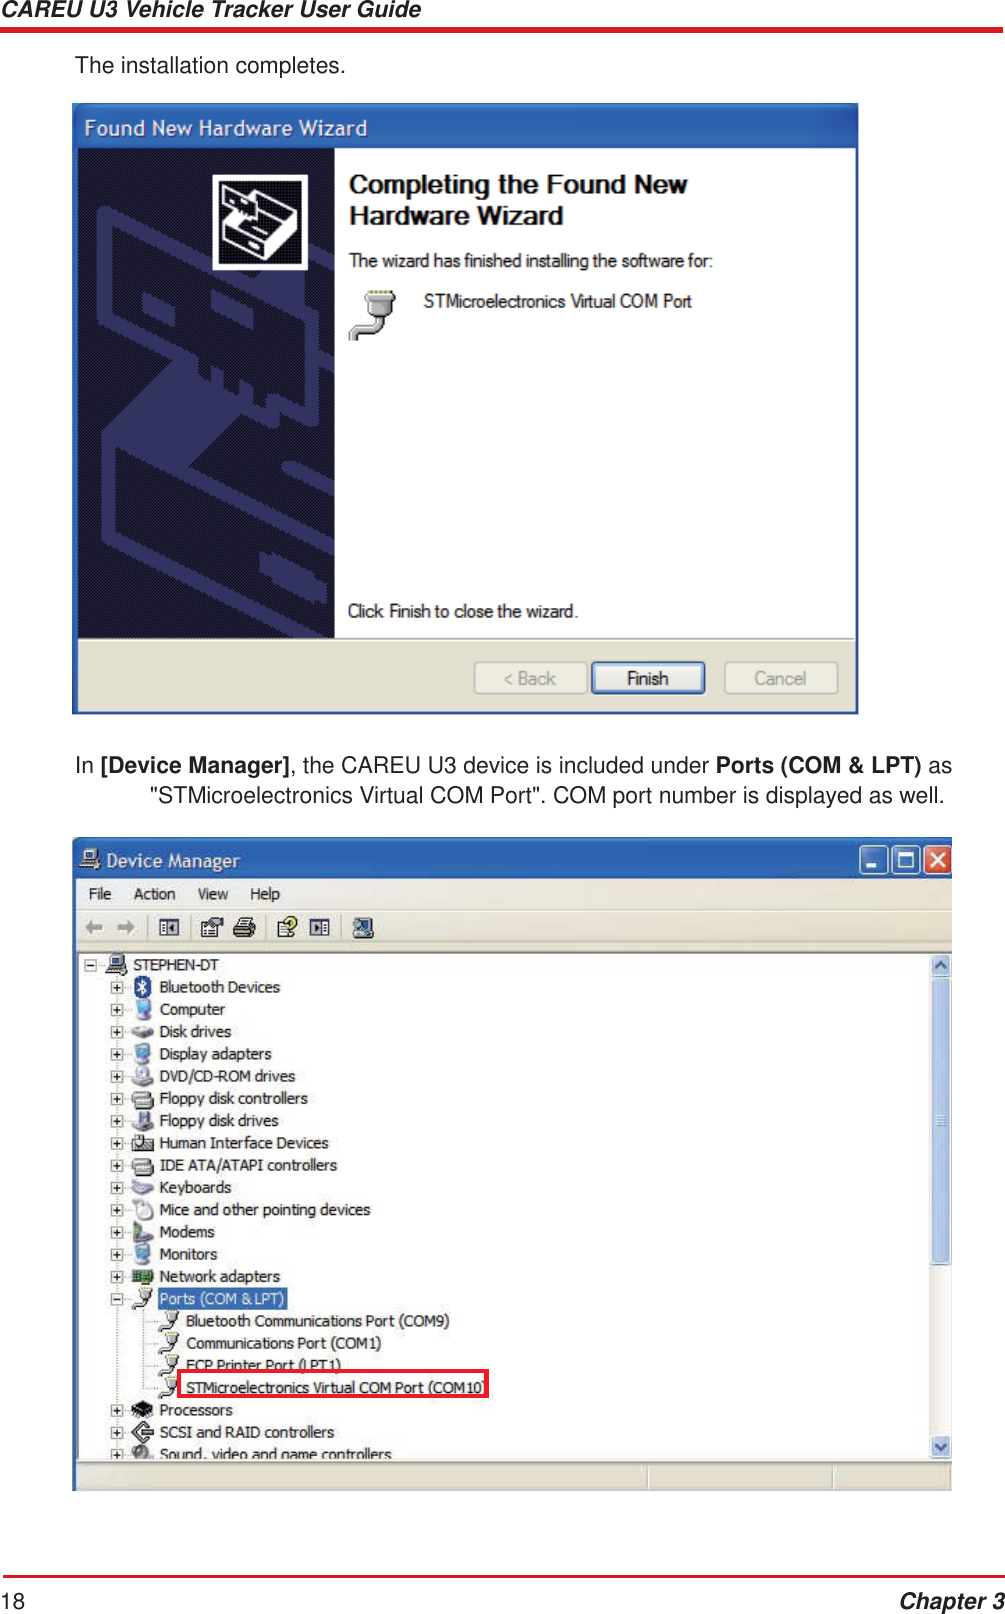 CAREU U3 Vehicle Tracker User Guide 18 Chapter 3    The installation completes.     In [Device Manager], the CAREU U3 device is included under Ports (COM &amp; LPT) as &quot;STMicroelectronics Virtual COM Port&quot;. COM port number is displayed as well. 